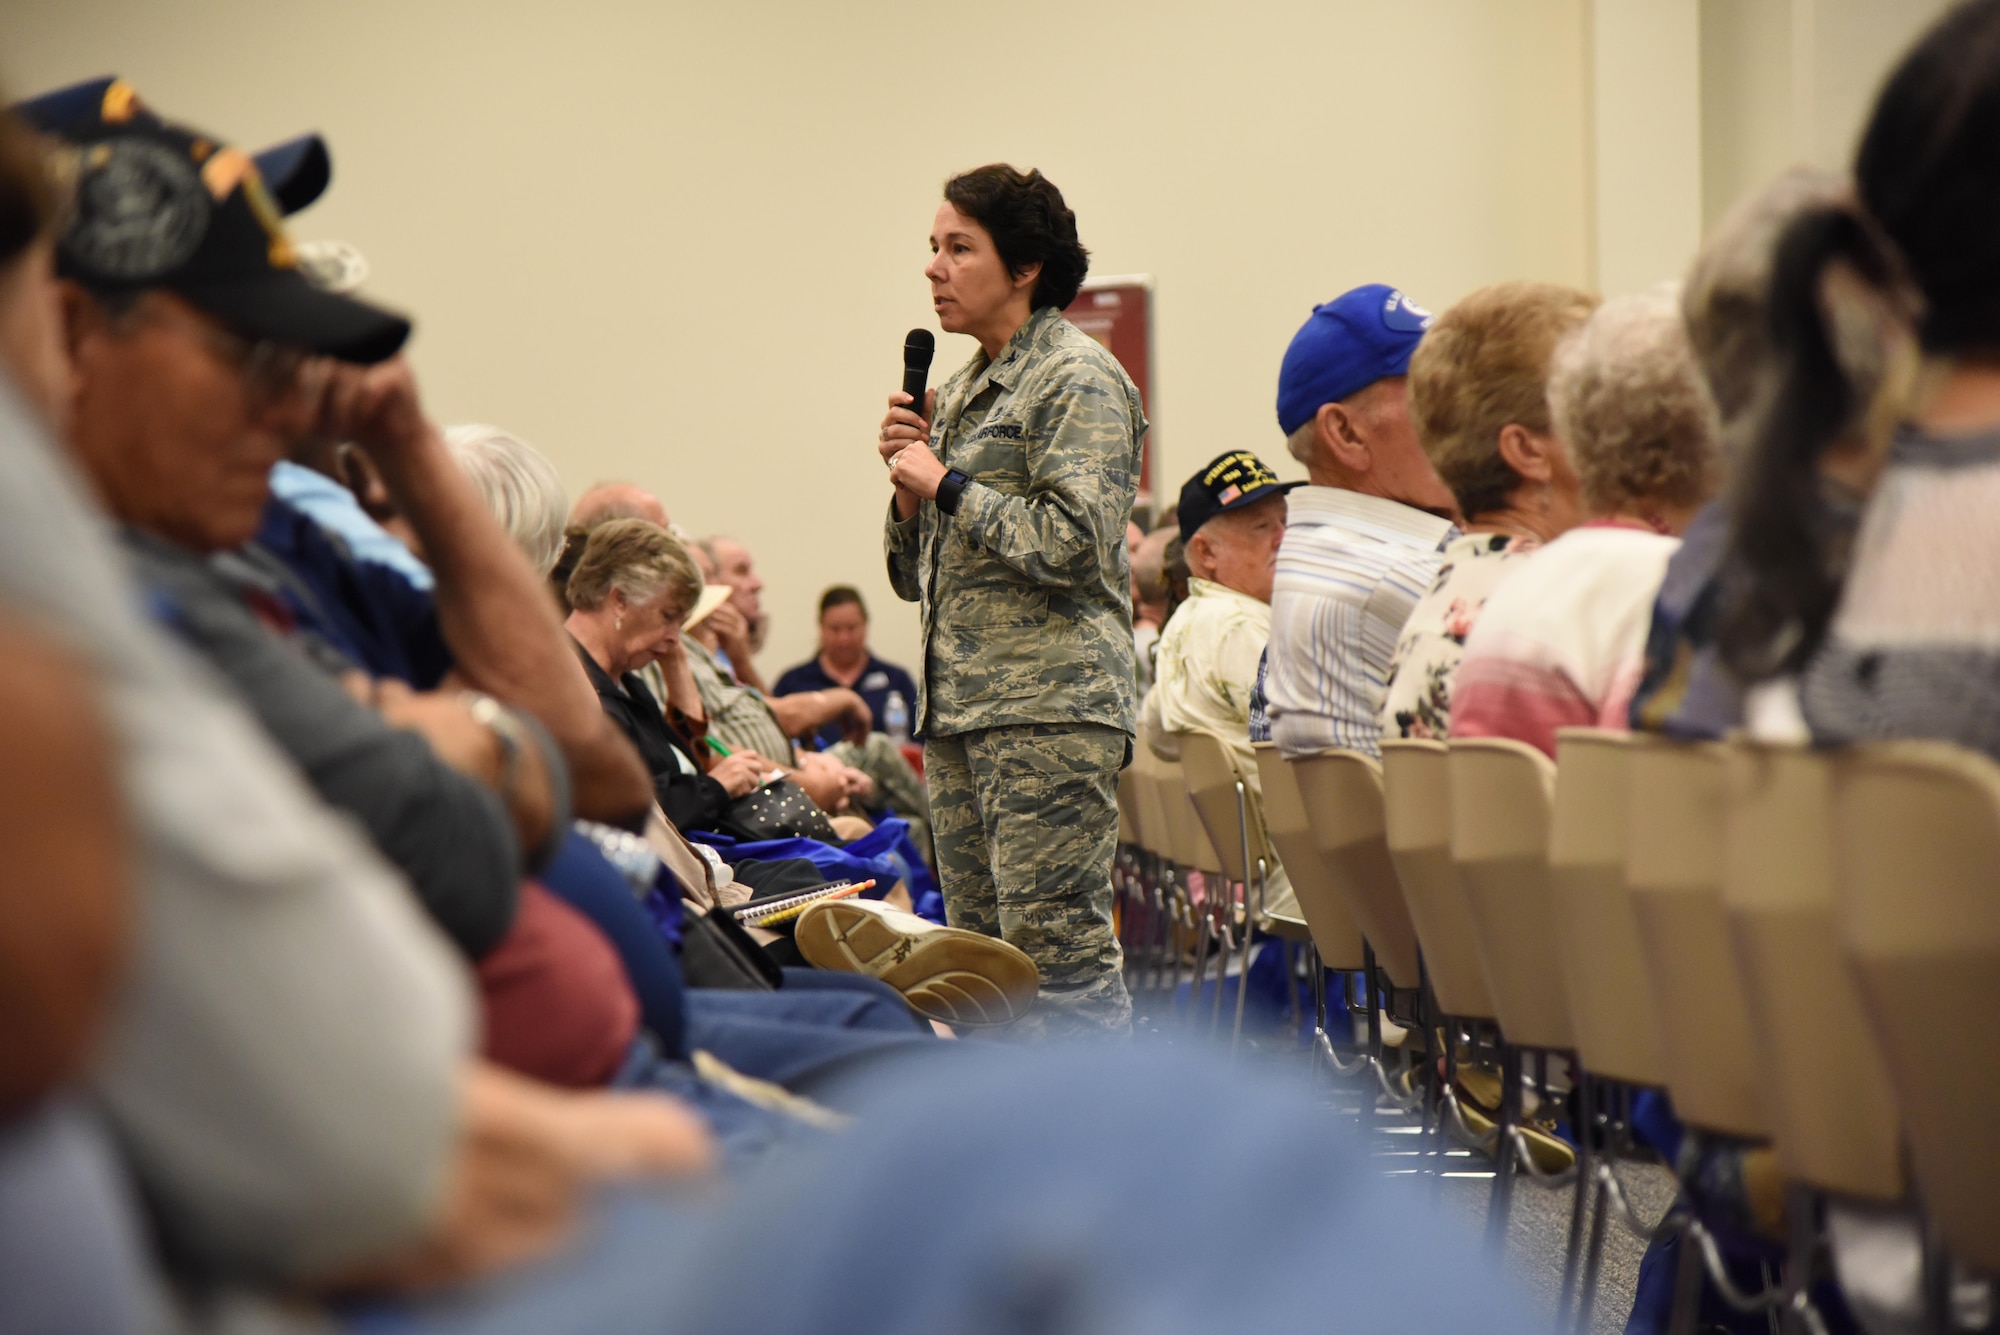 Col. Jeannine Ryder, 81st Medical Group commander, briefs on the Keesler Medical Center capabilities during Retiree Appreciation Day at the Roberts Consolidated Aircraft Maintenance Facility Oct. 20, 2017, on Keesler Air Force Base, Mississippi. The annual event, sponsored by the Keesler Retiree Activities Office, included more than 20 displays with information pertinent to retirees and a free lunch. (U.S. Air Force photo by Kemberly Groue)